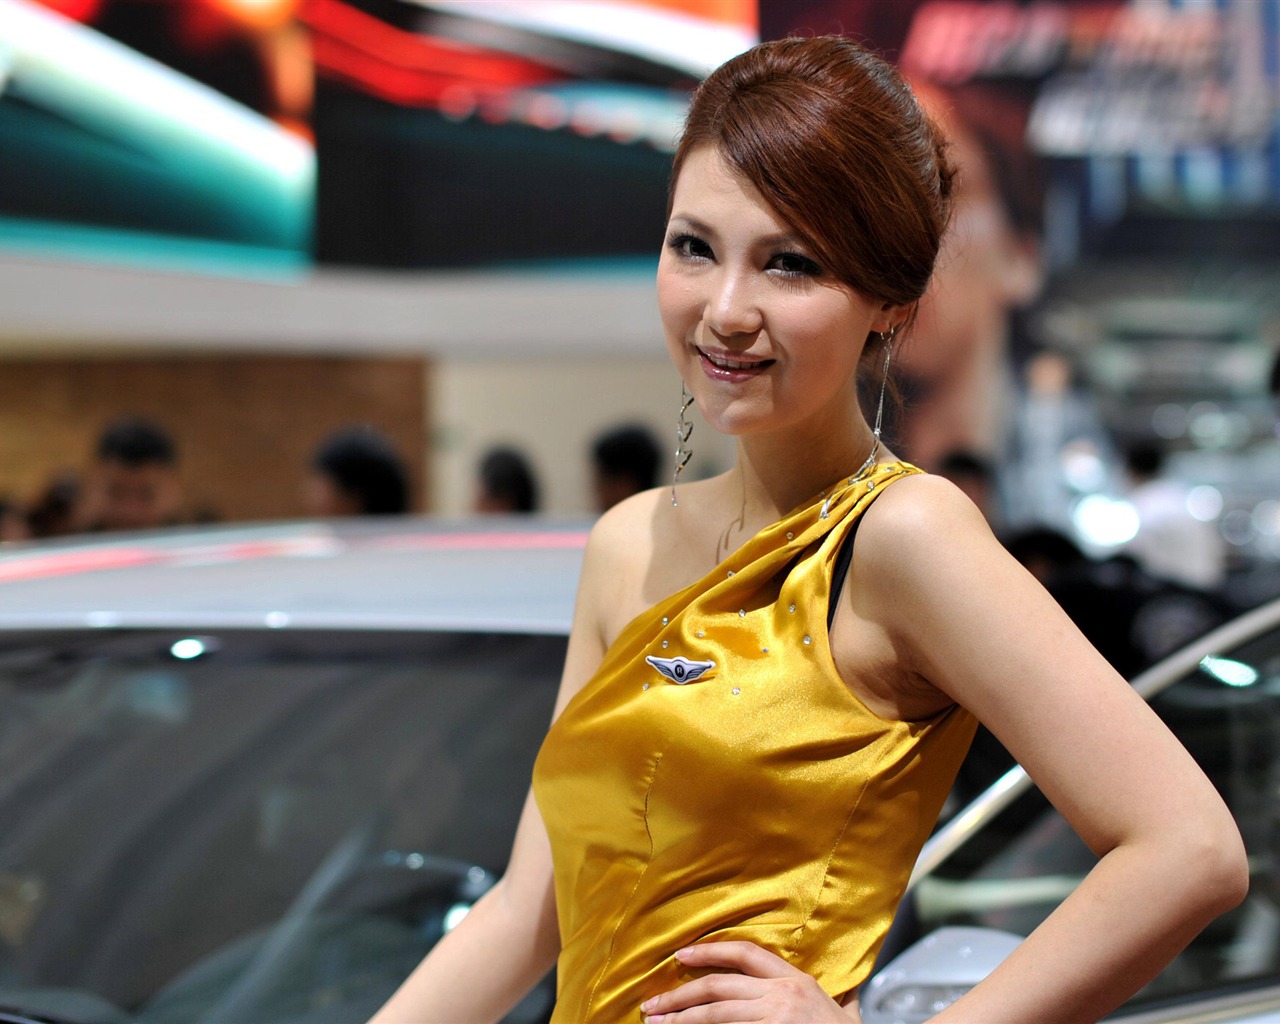 2010 Beijing Auto Show beauty (Kuei-east of the first works) #1 - 1280x1024